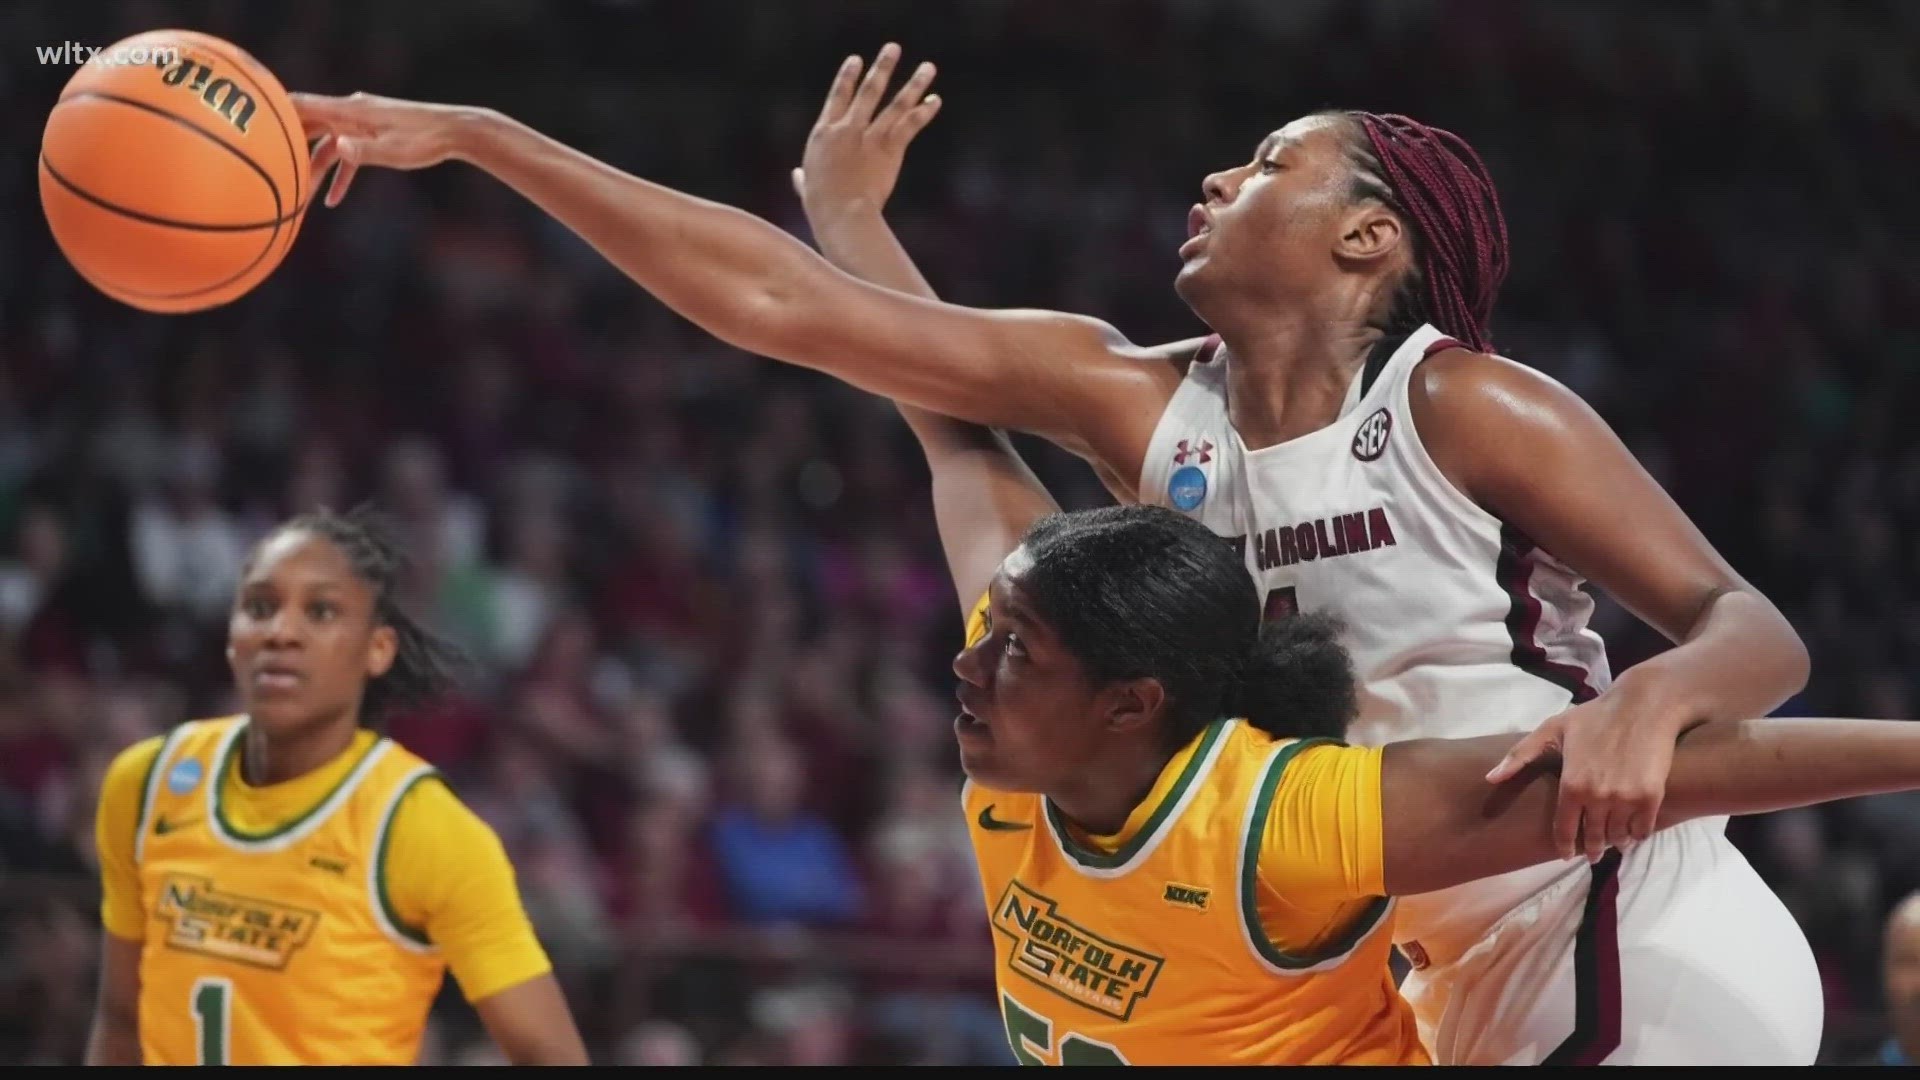 South Carolina moved five wins away from a perfect season after opening the women's NCAA Tournament with a victory over Norfolk State.